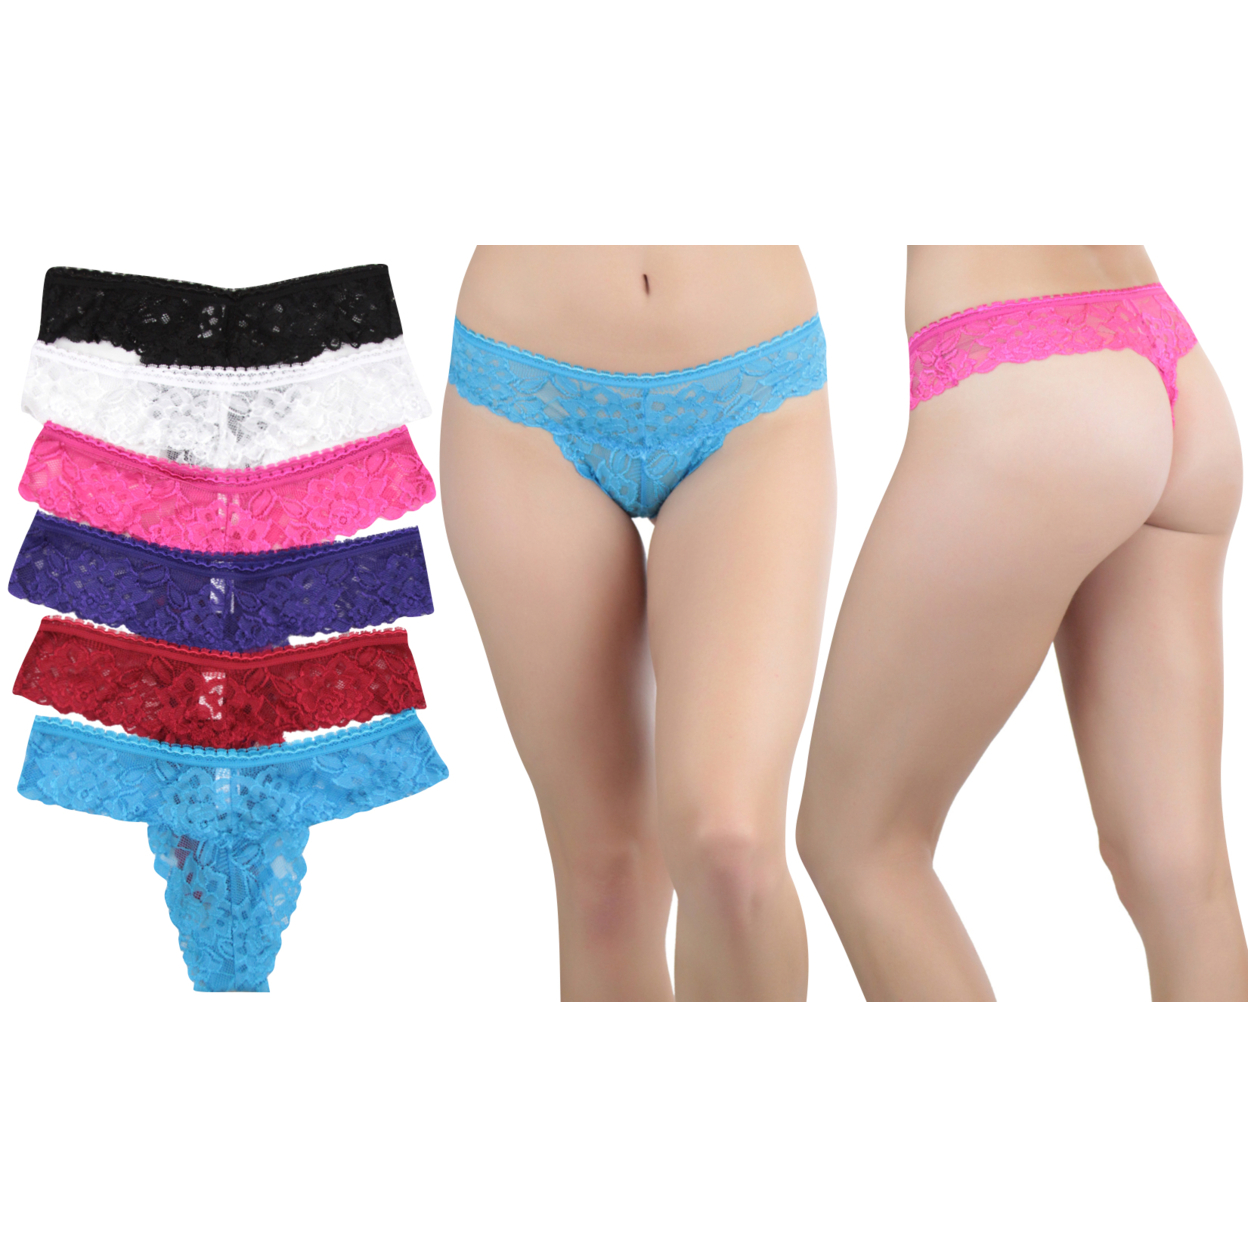 6 Pack Of Women's Low Rise Floral Thongs - Large